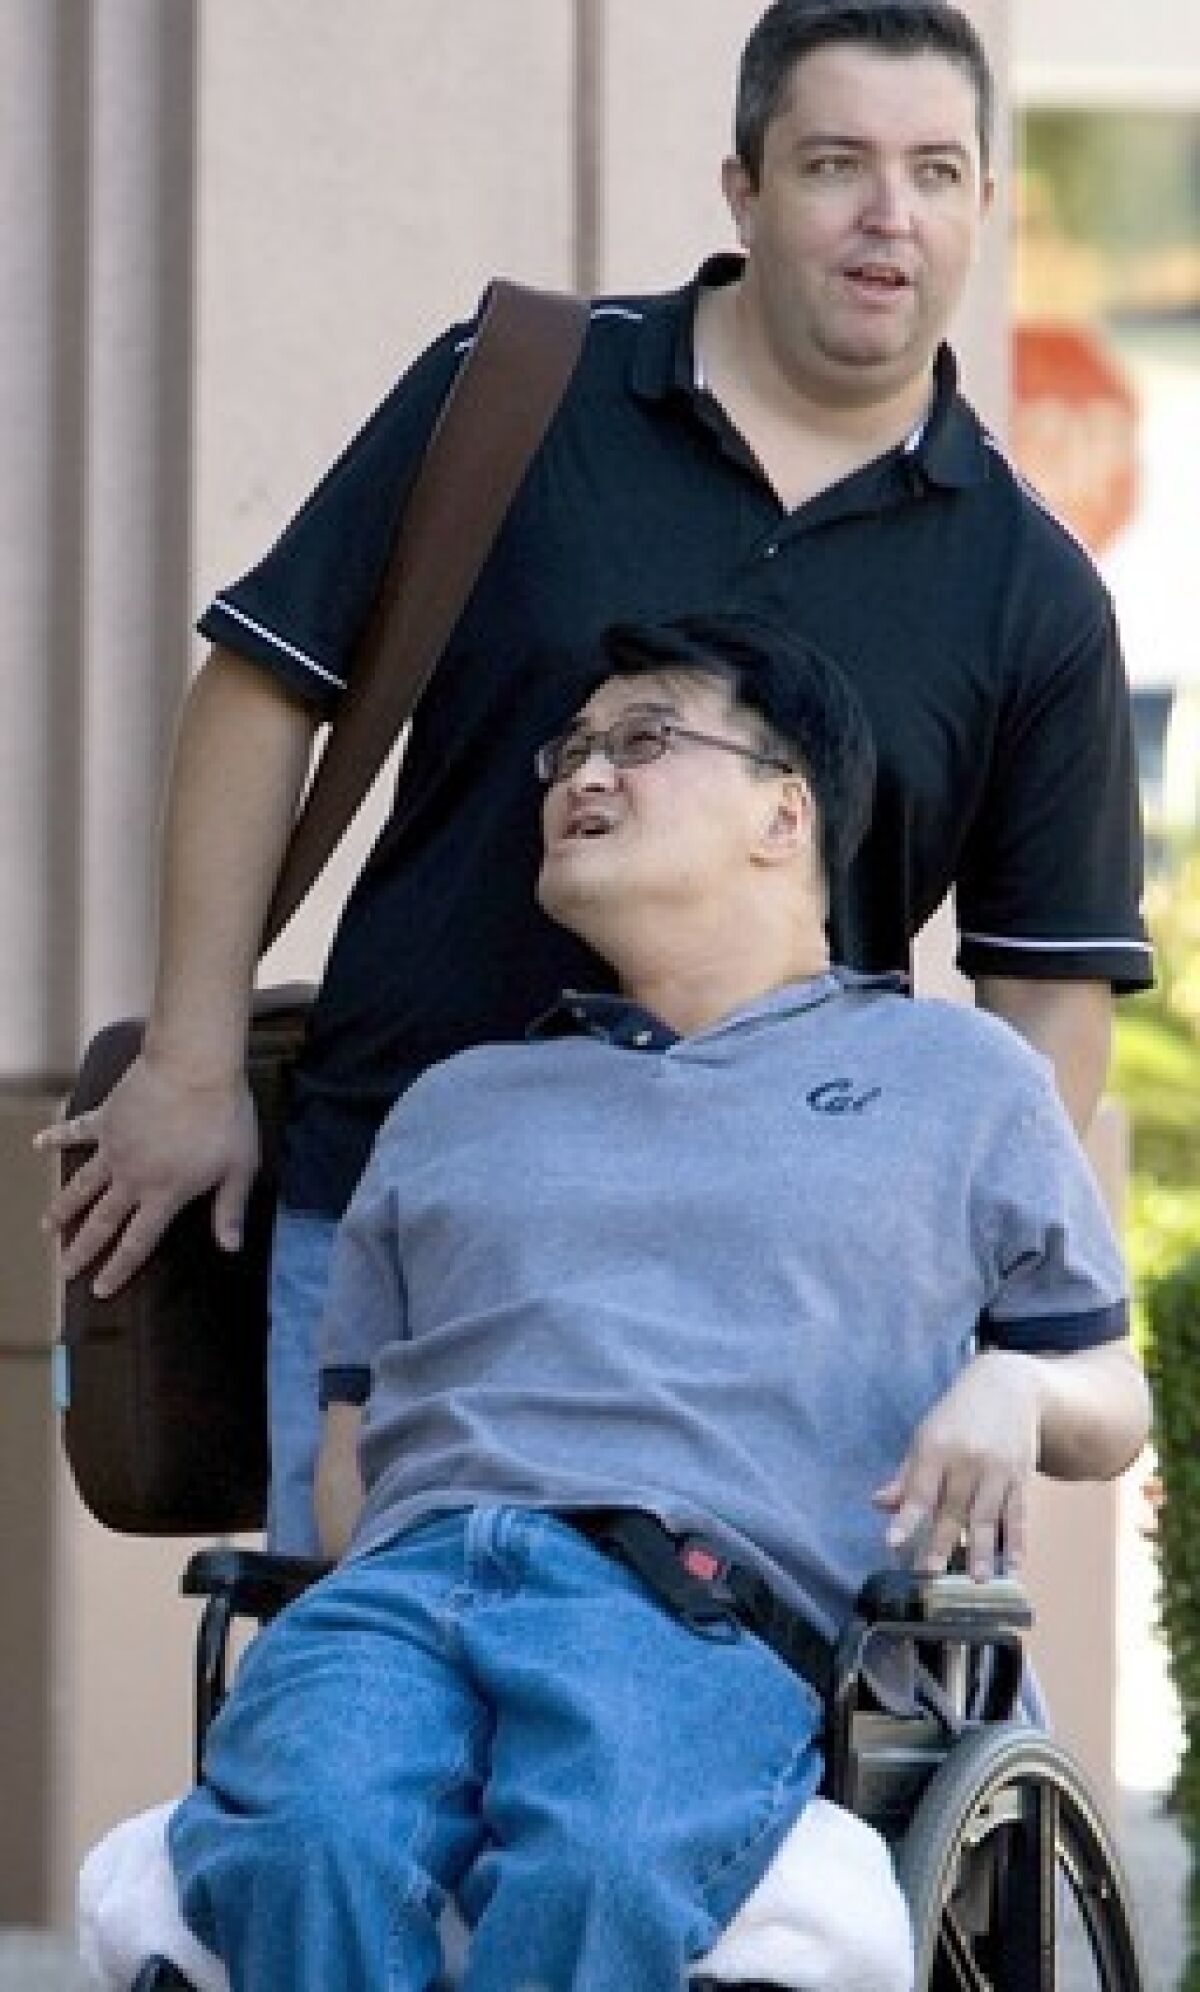 Matthew Kim, who has cerebral palsy, was barred from the classroom over alleged harassment.